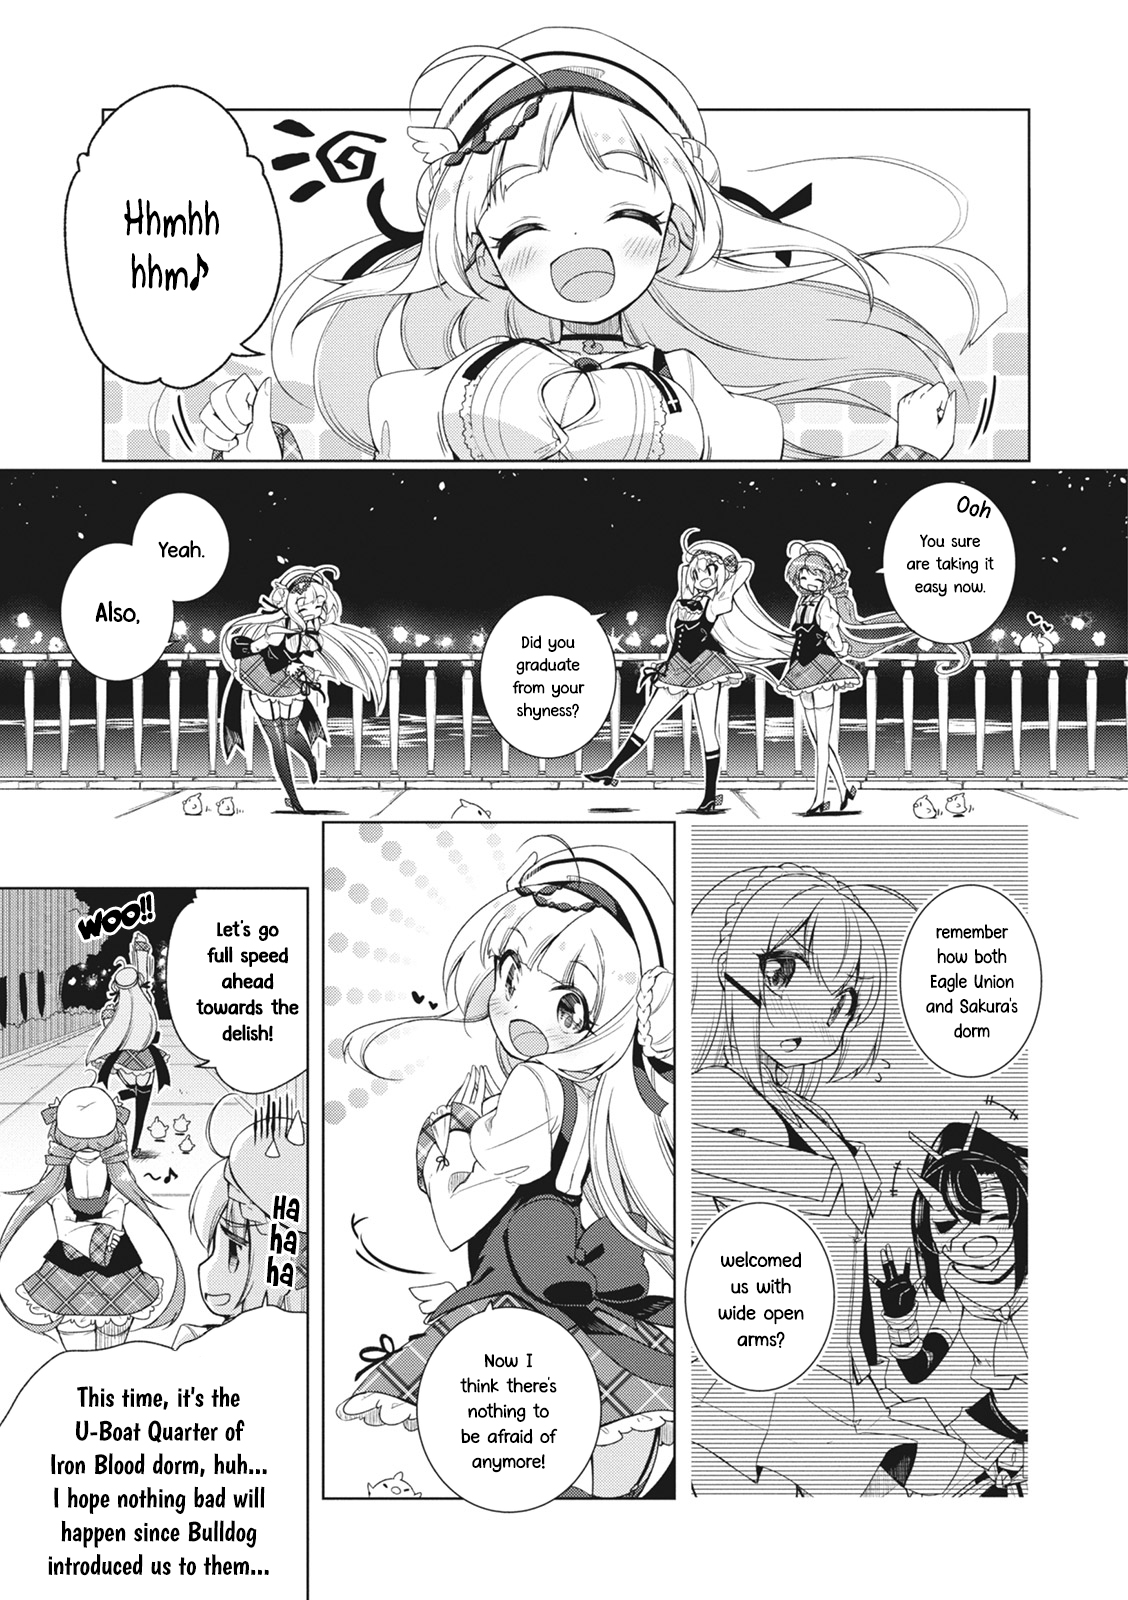 Azur Lane Smile Dish! Vol.1 Chapter 3: U-Boats And Friend-Making Meat Dishes - Picture 1